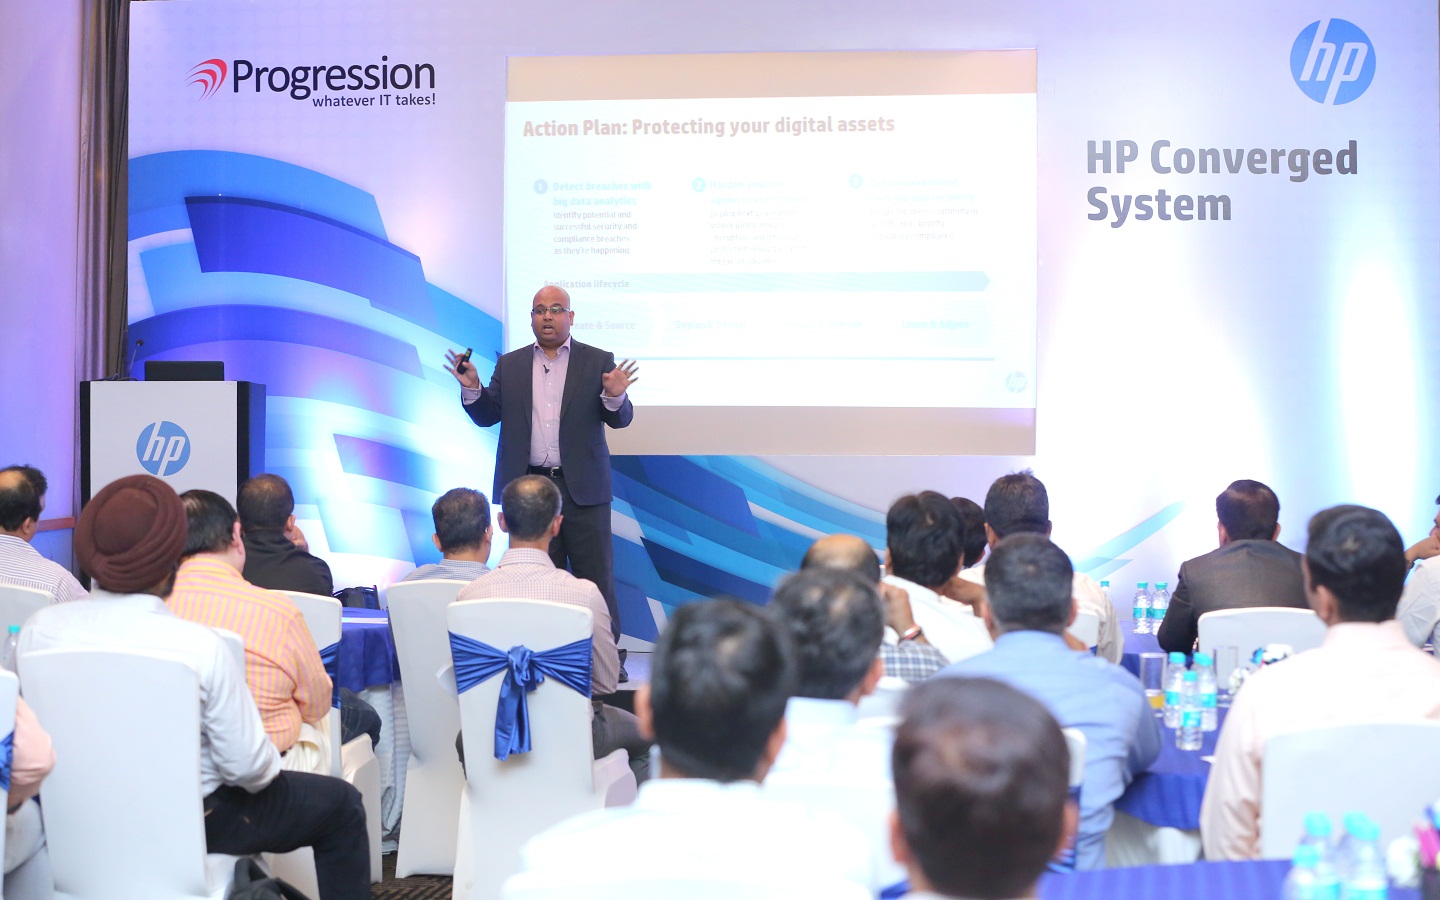 Mr. Swastik Chakraborty, an Ex-ISRO Scientist and key contributor in the Chandrayaan Mission gave insights into HP Converged System.